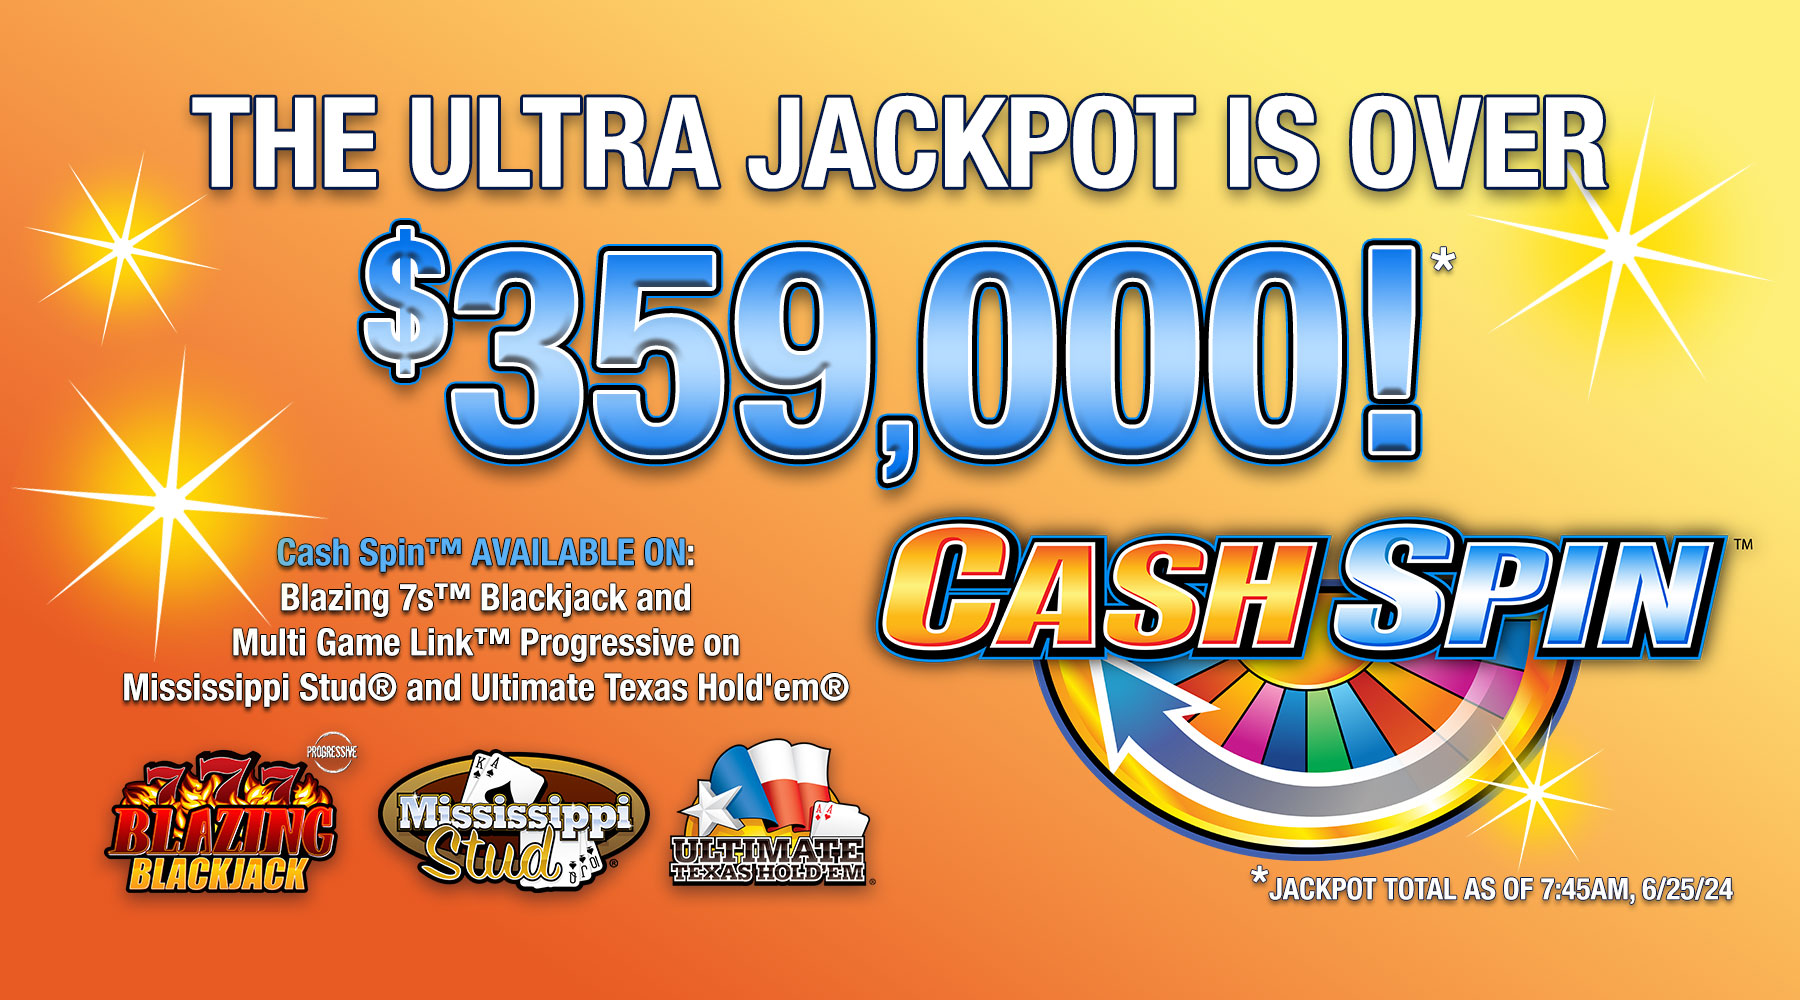 Cash spin ultra jackpot $359,000+ as of 6/25/24!